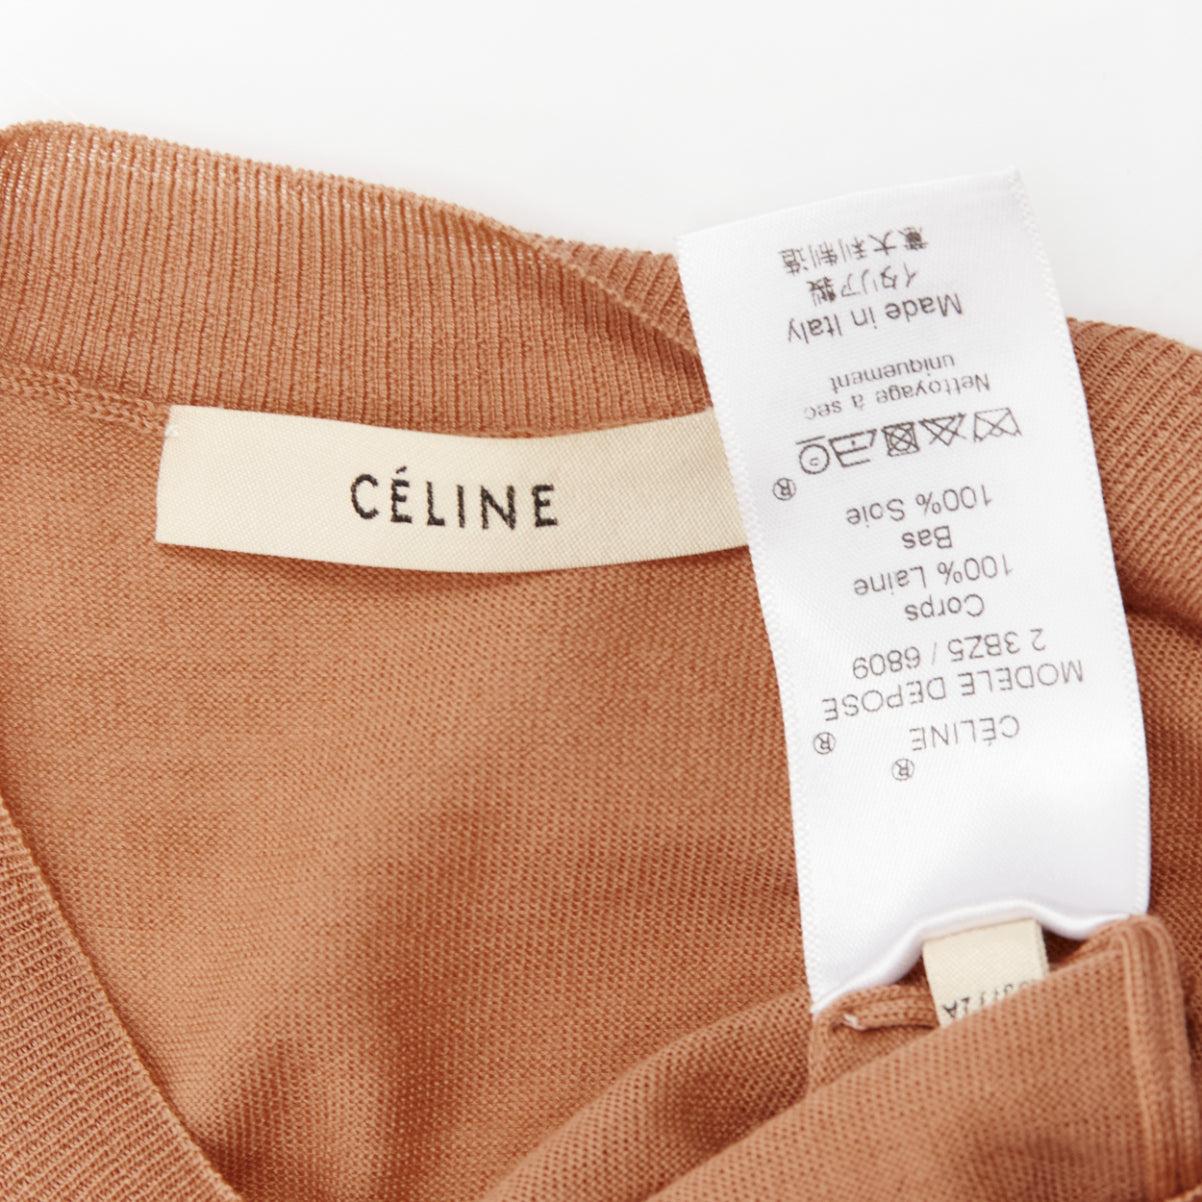 CELINE Phoebe Philo nude 100% wool silk bicolor wide strap vest knitted top XS For Sale 4